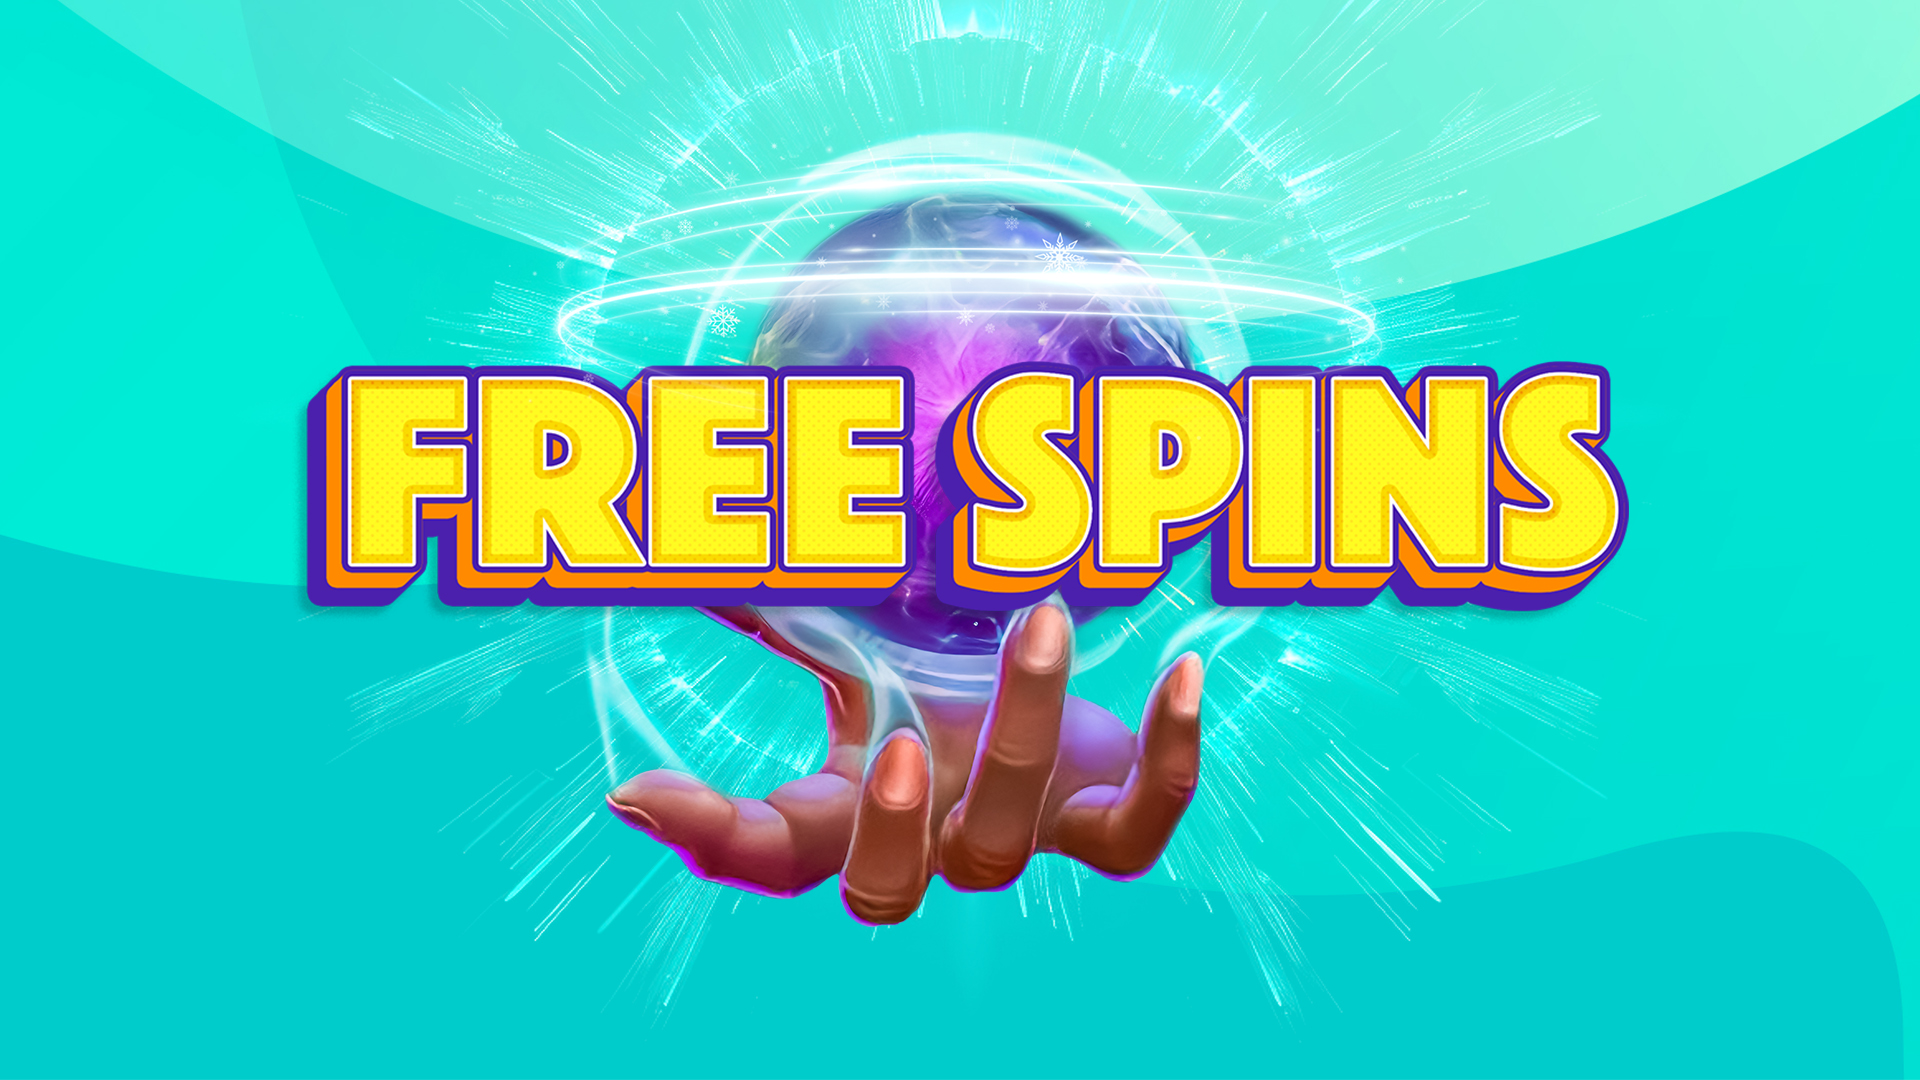 A 3D-animated hand with a magical purple and pink neon-colored glass ball hovering above it, with magic swooshes surrounding it. Either side are the words “free spins” in bold, yellow capital letters, set against a two-toned teal abstract background.